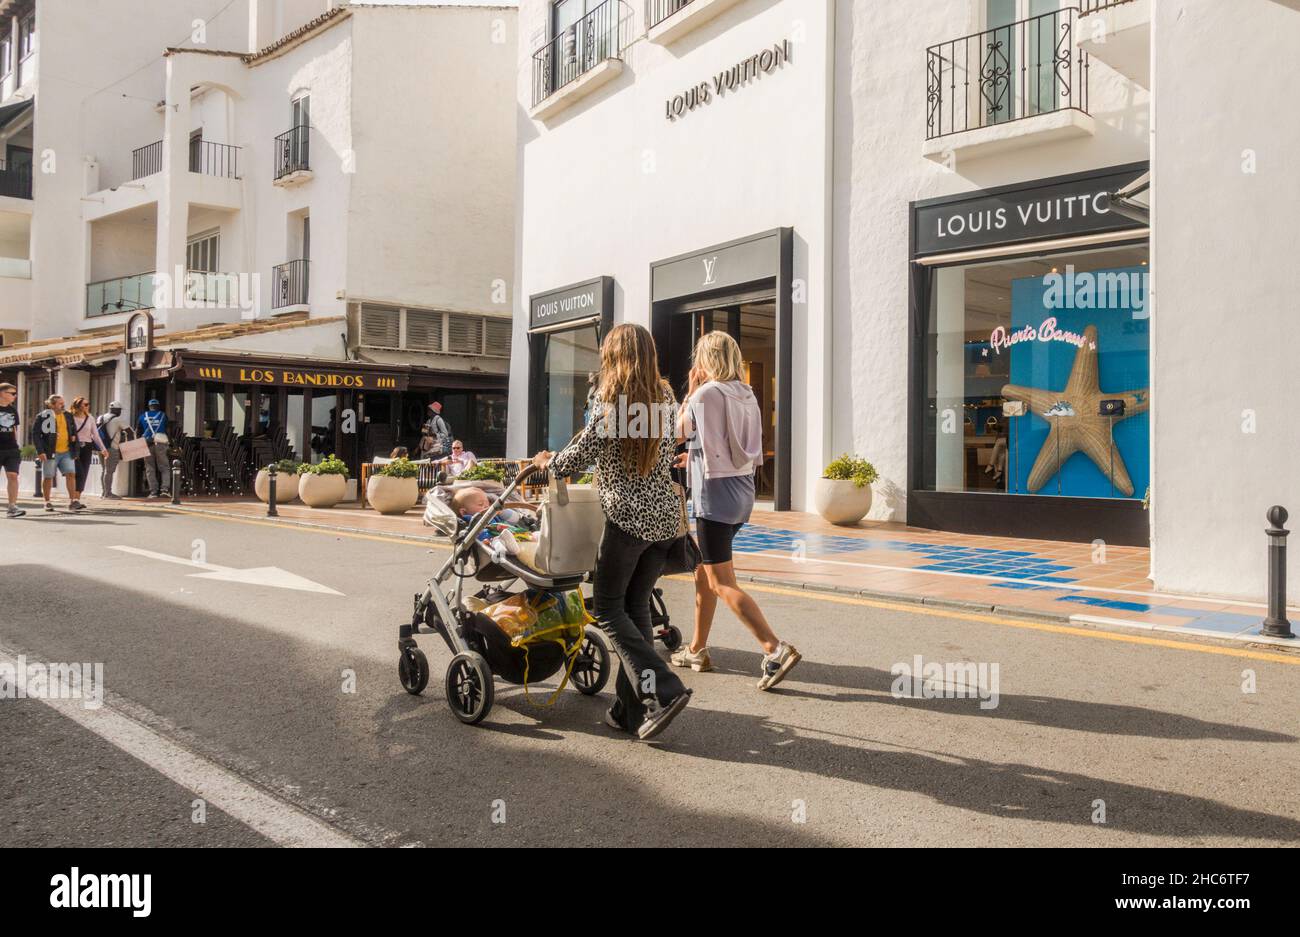 Louis Vuitton Spain High Resolution Stock Photography and Images - Alamy